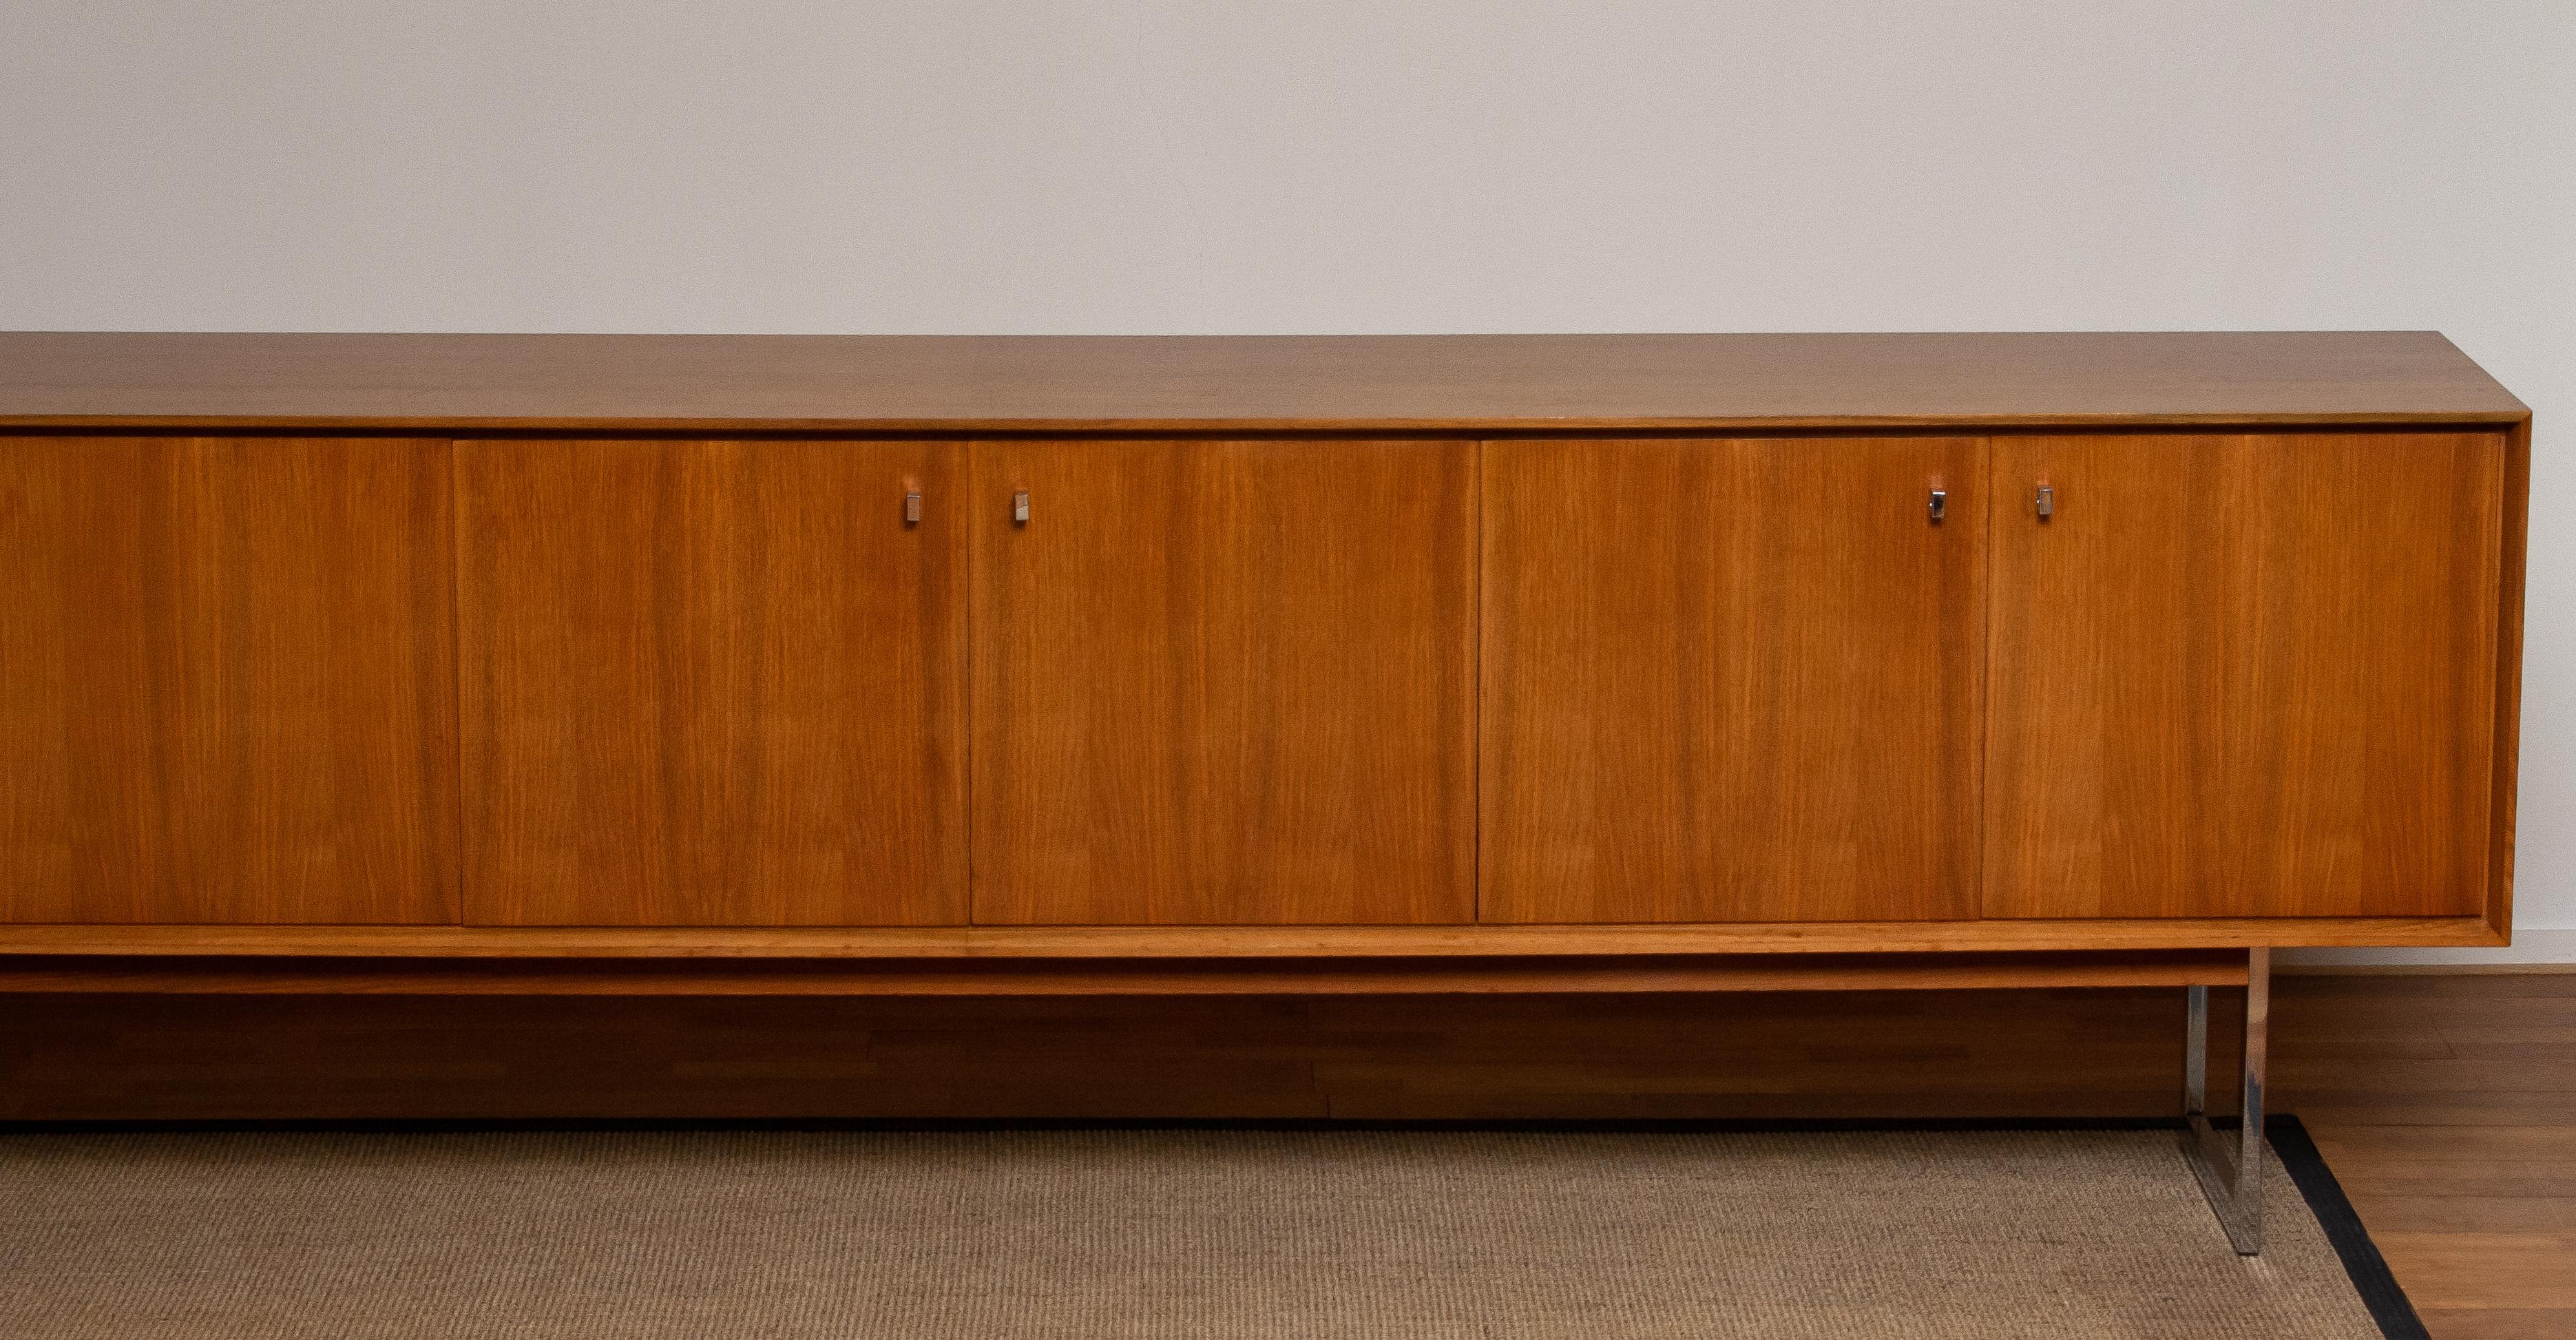 1970, Wide Credenzas Sideboard in Walnut with Chrome Handles and Legs 3